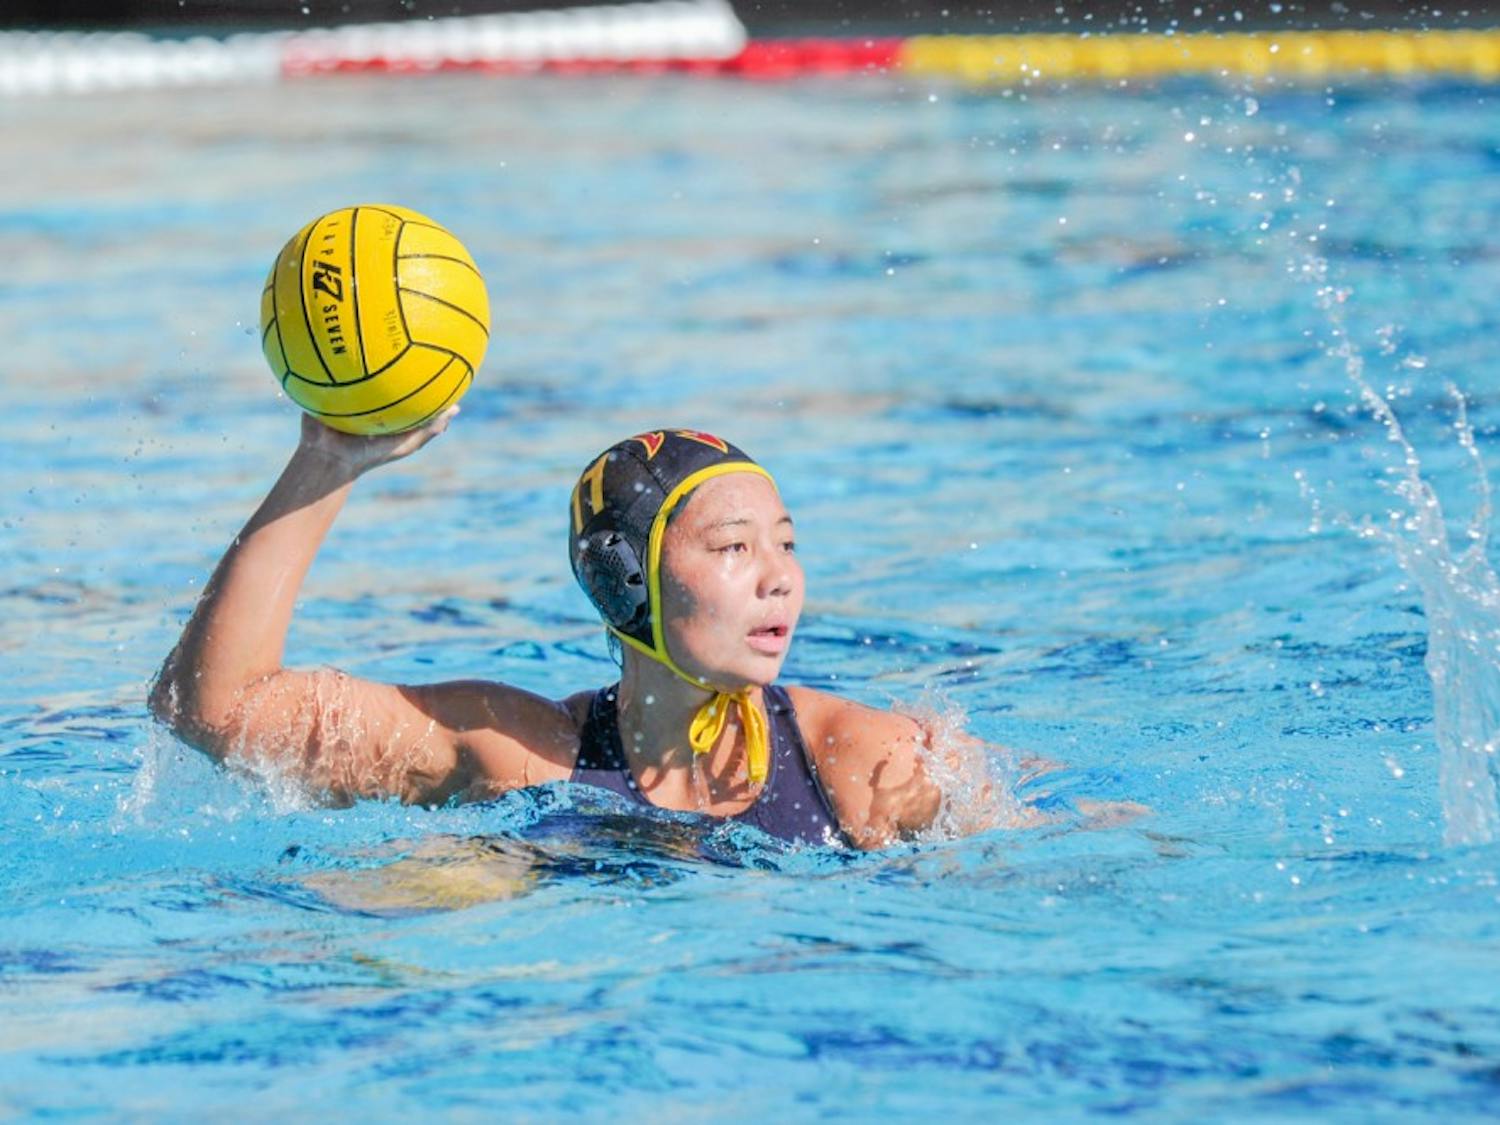 Senior Ao Gao looks for the pass&nbsp;against the University of Pacific on Sunday, March 20, 2016 at the Mona Plummer Aquatic Complex in Tempe, AZ. ASU water polo won 5-3.